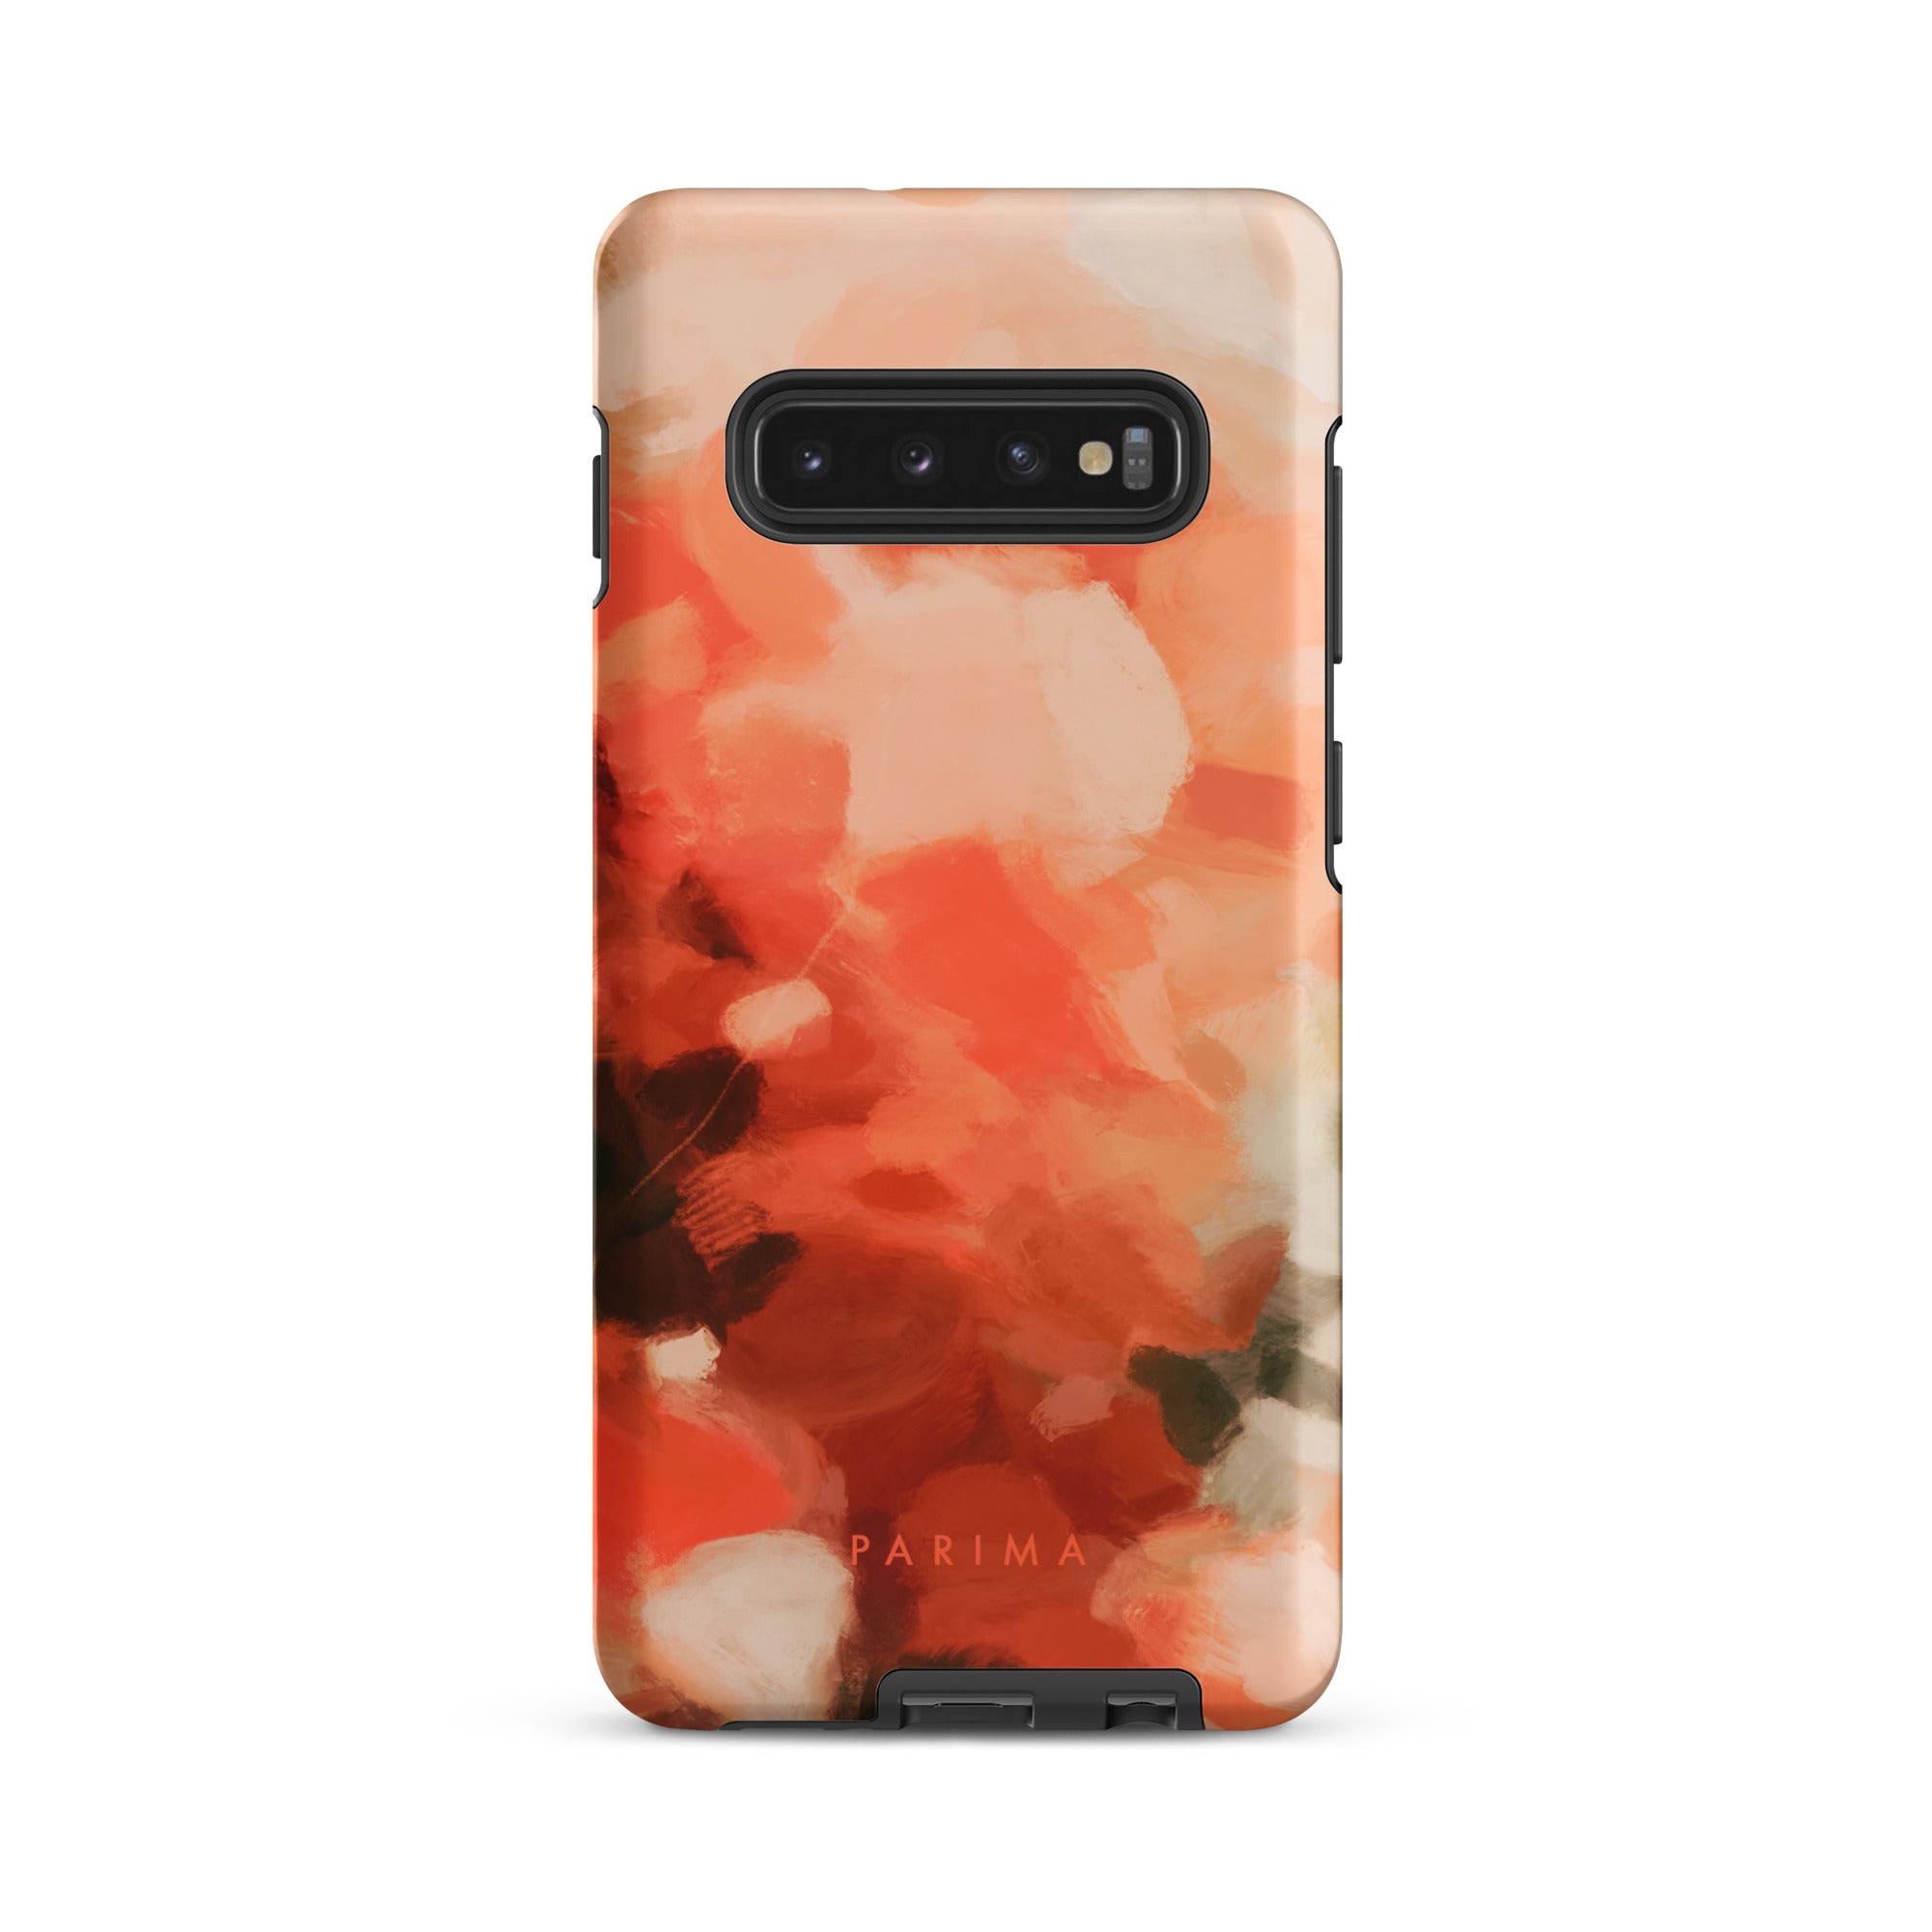 Sweet Nectar, orange and pink abstract art on Samsung Galaxy S10 Plus tough case by Parima Studio